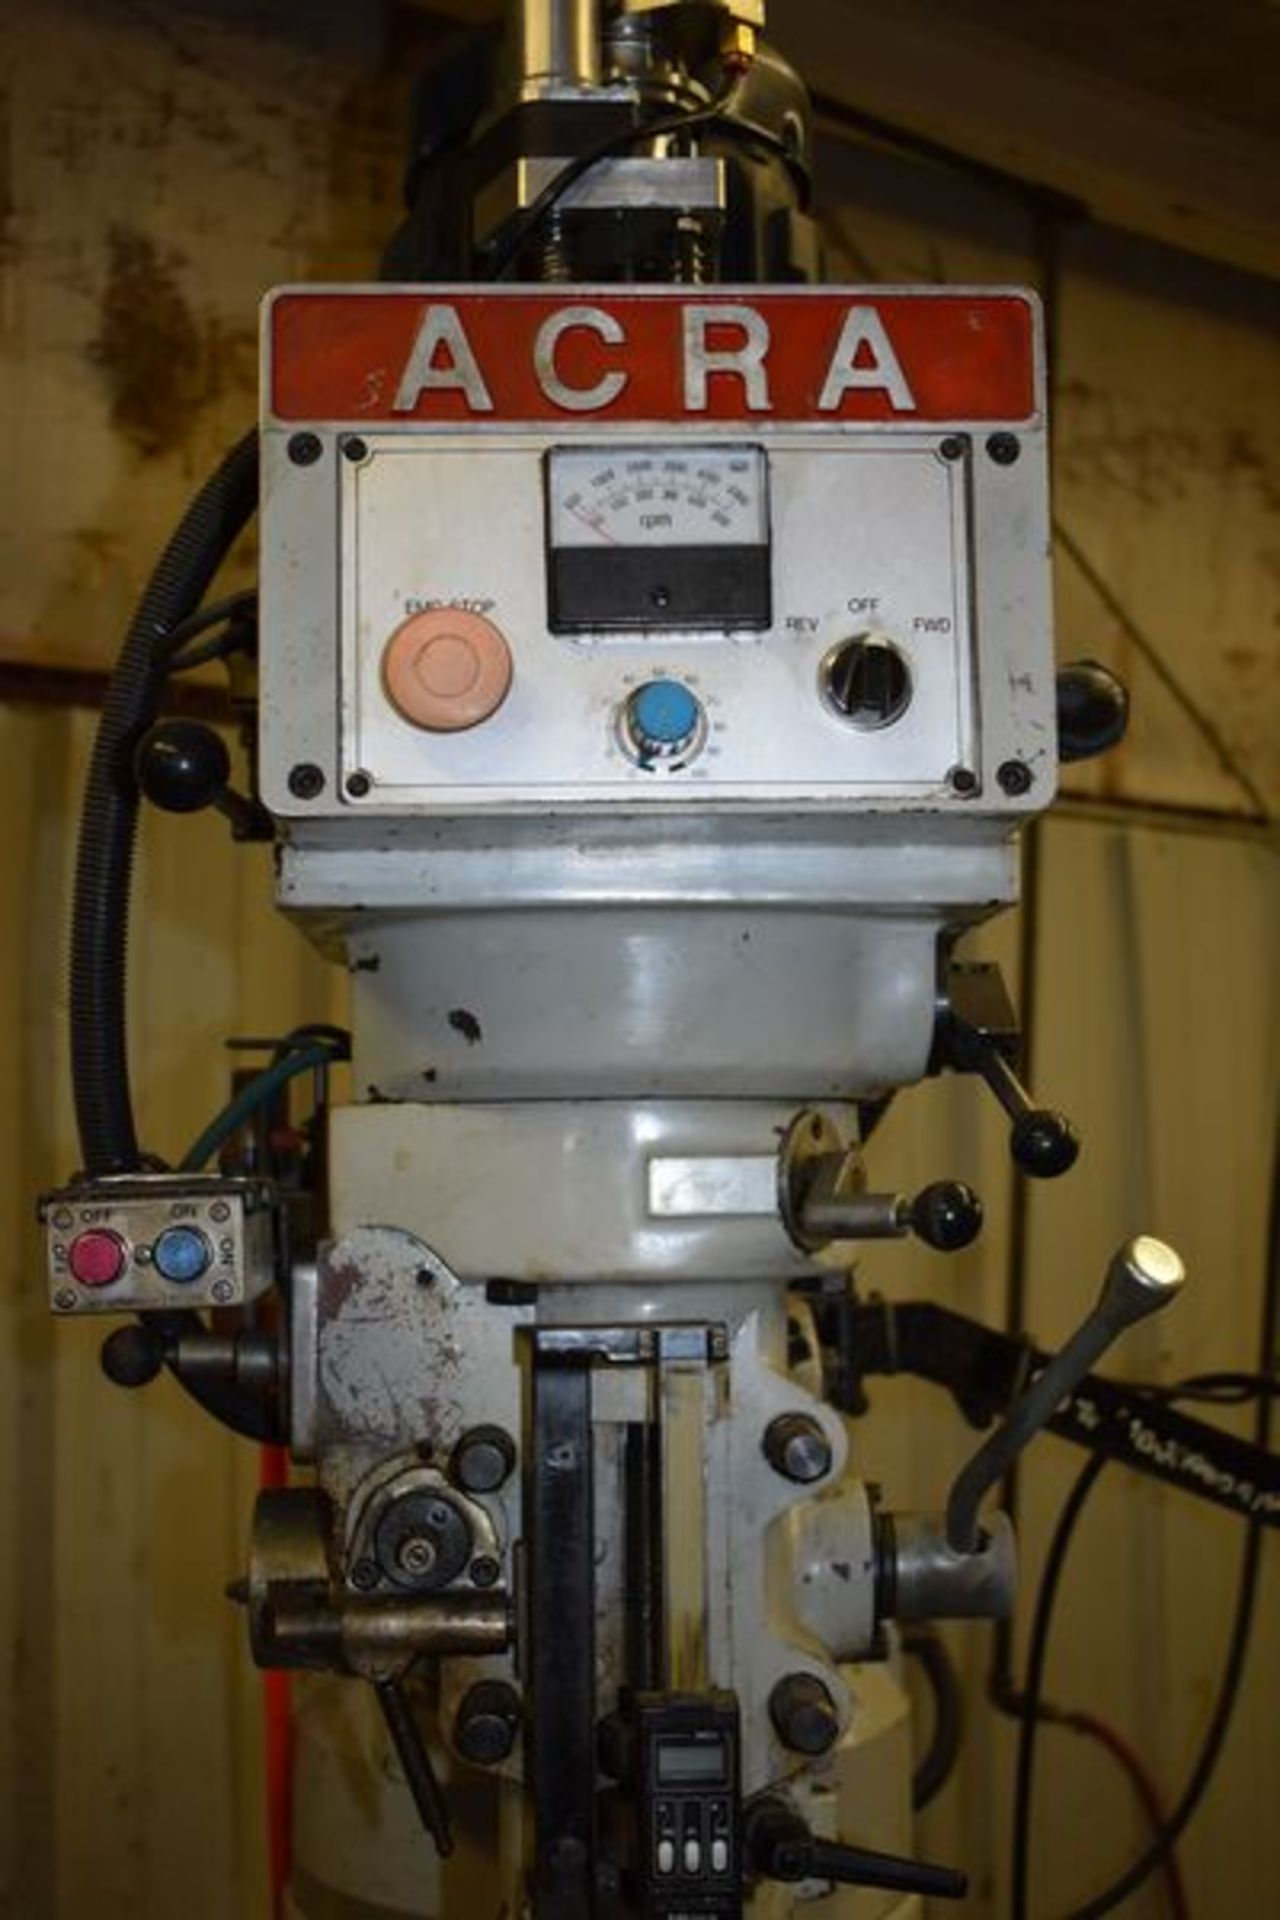 ACRA VERTICAL MILL, 10" X 54" TABLE, X AXIS RAPID FEED, POWER SPINDLE, SONY DRO - Image 3 of 3